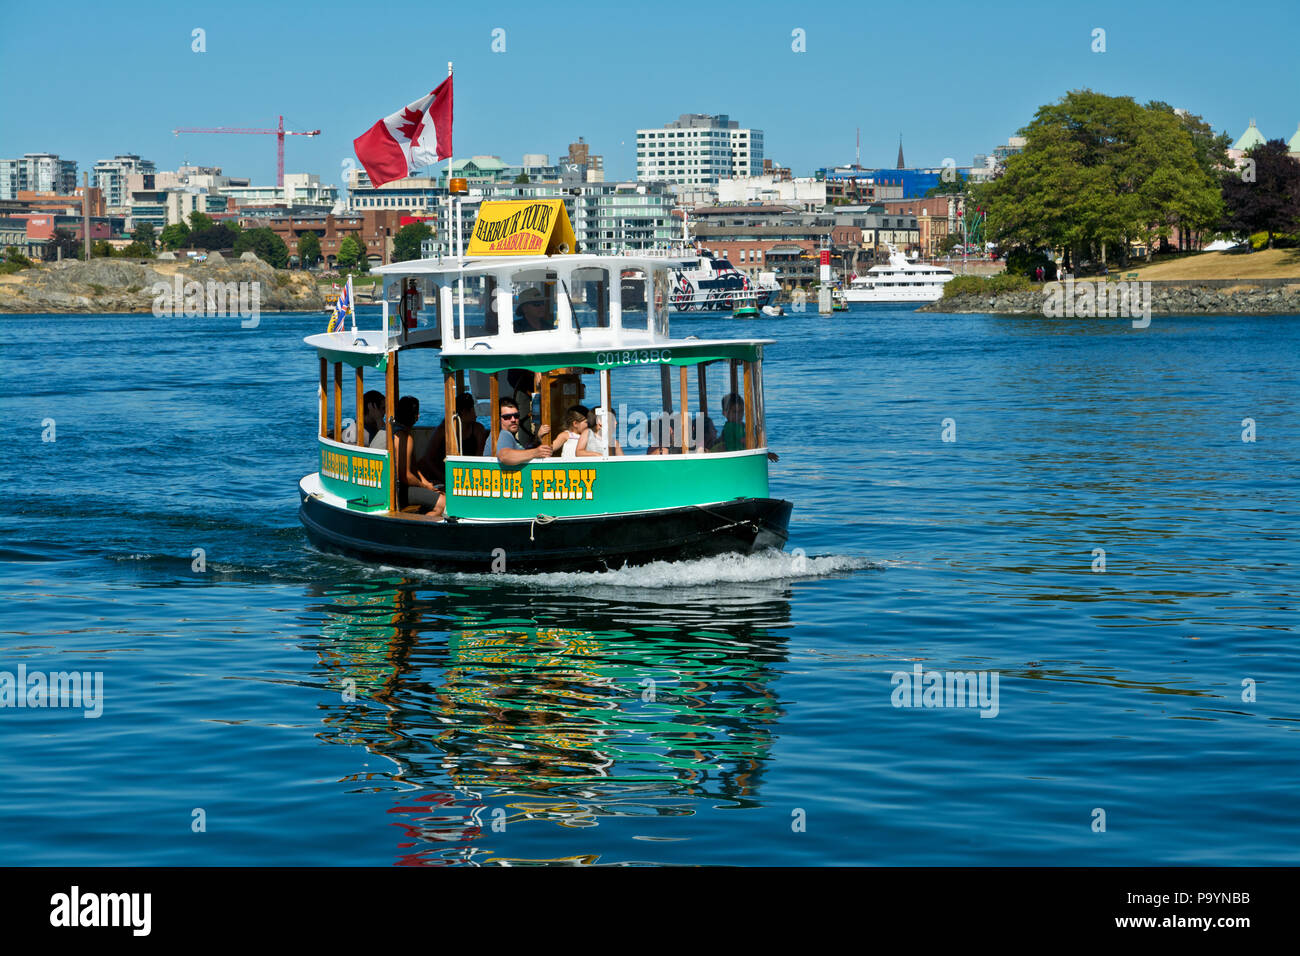 Victoria Harbour Ferry.  Harbour Ferries in Victoria, British Columbia, Canada, tourists on tours of the inner harbour and waterways. Victoria BC. Stock Photo